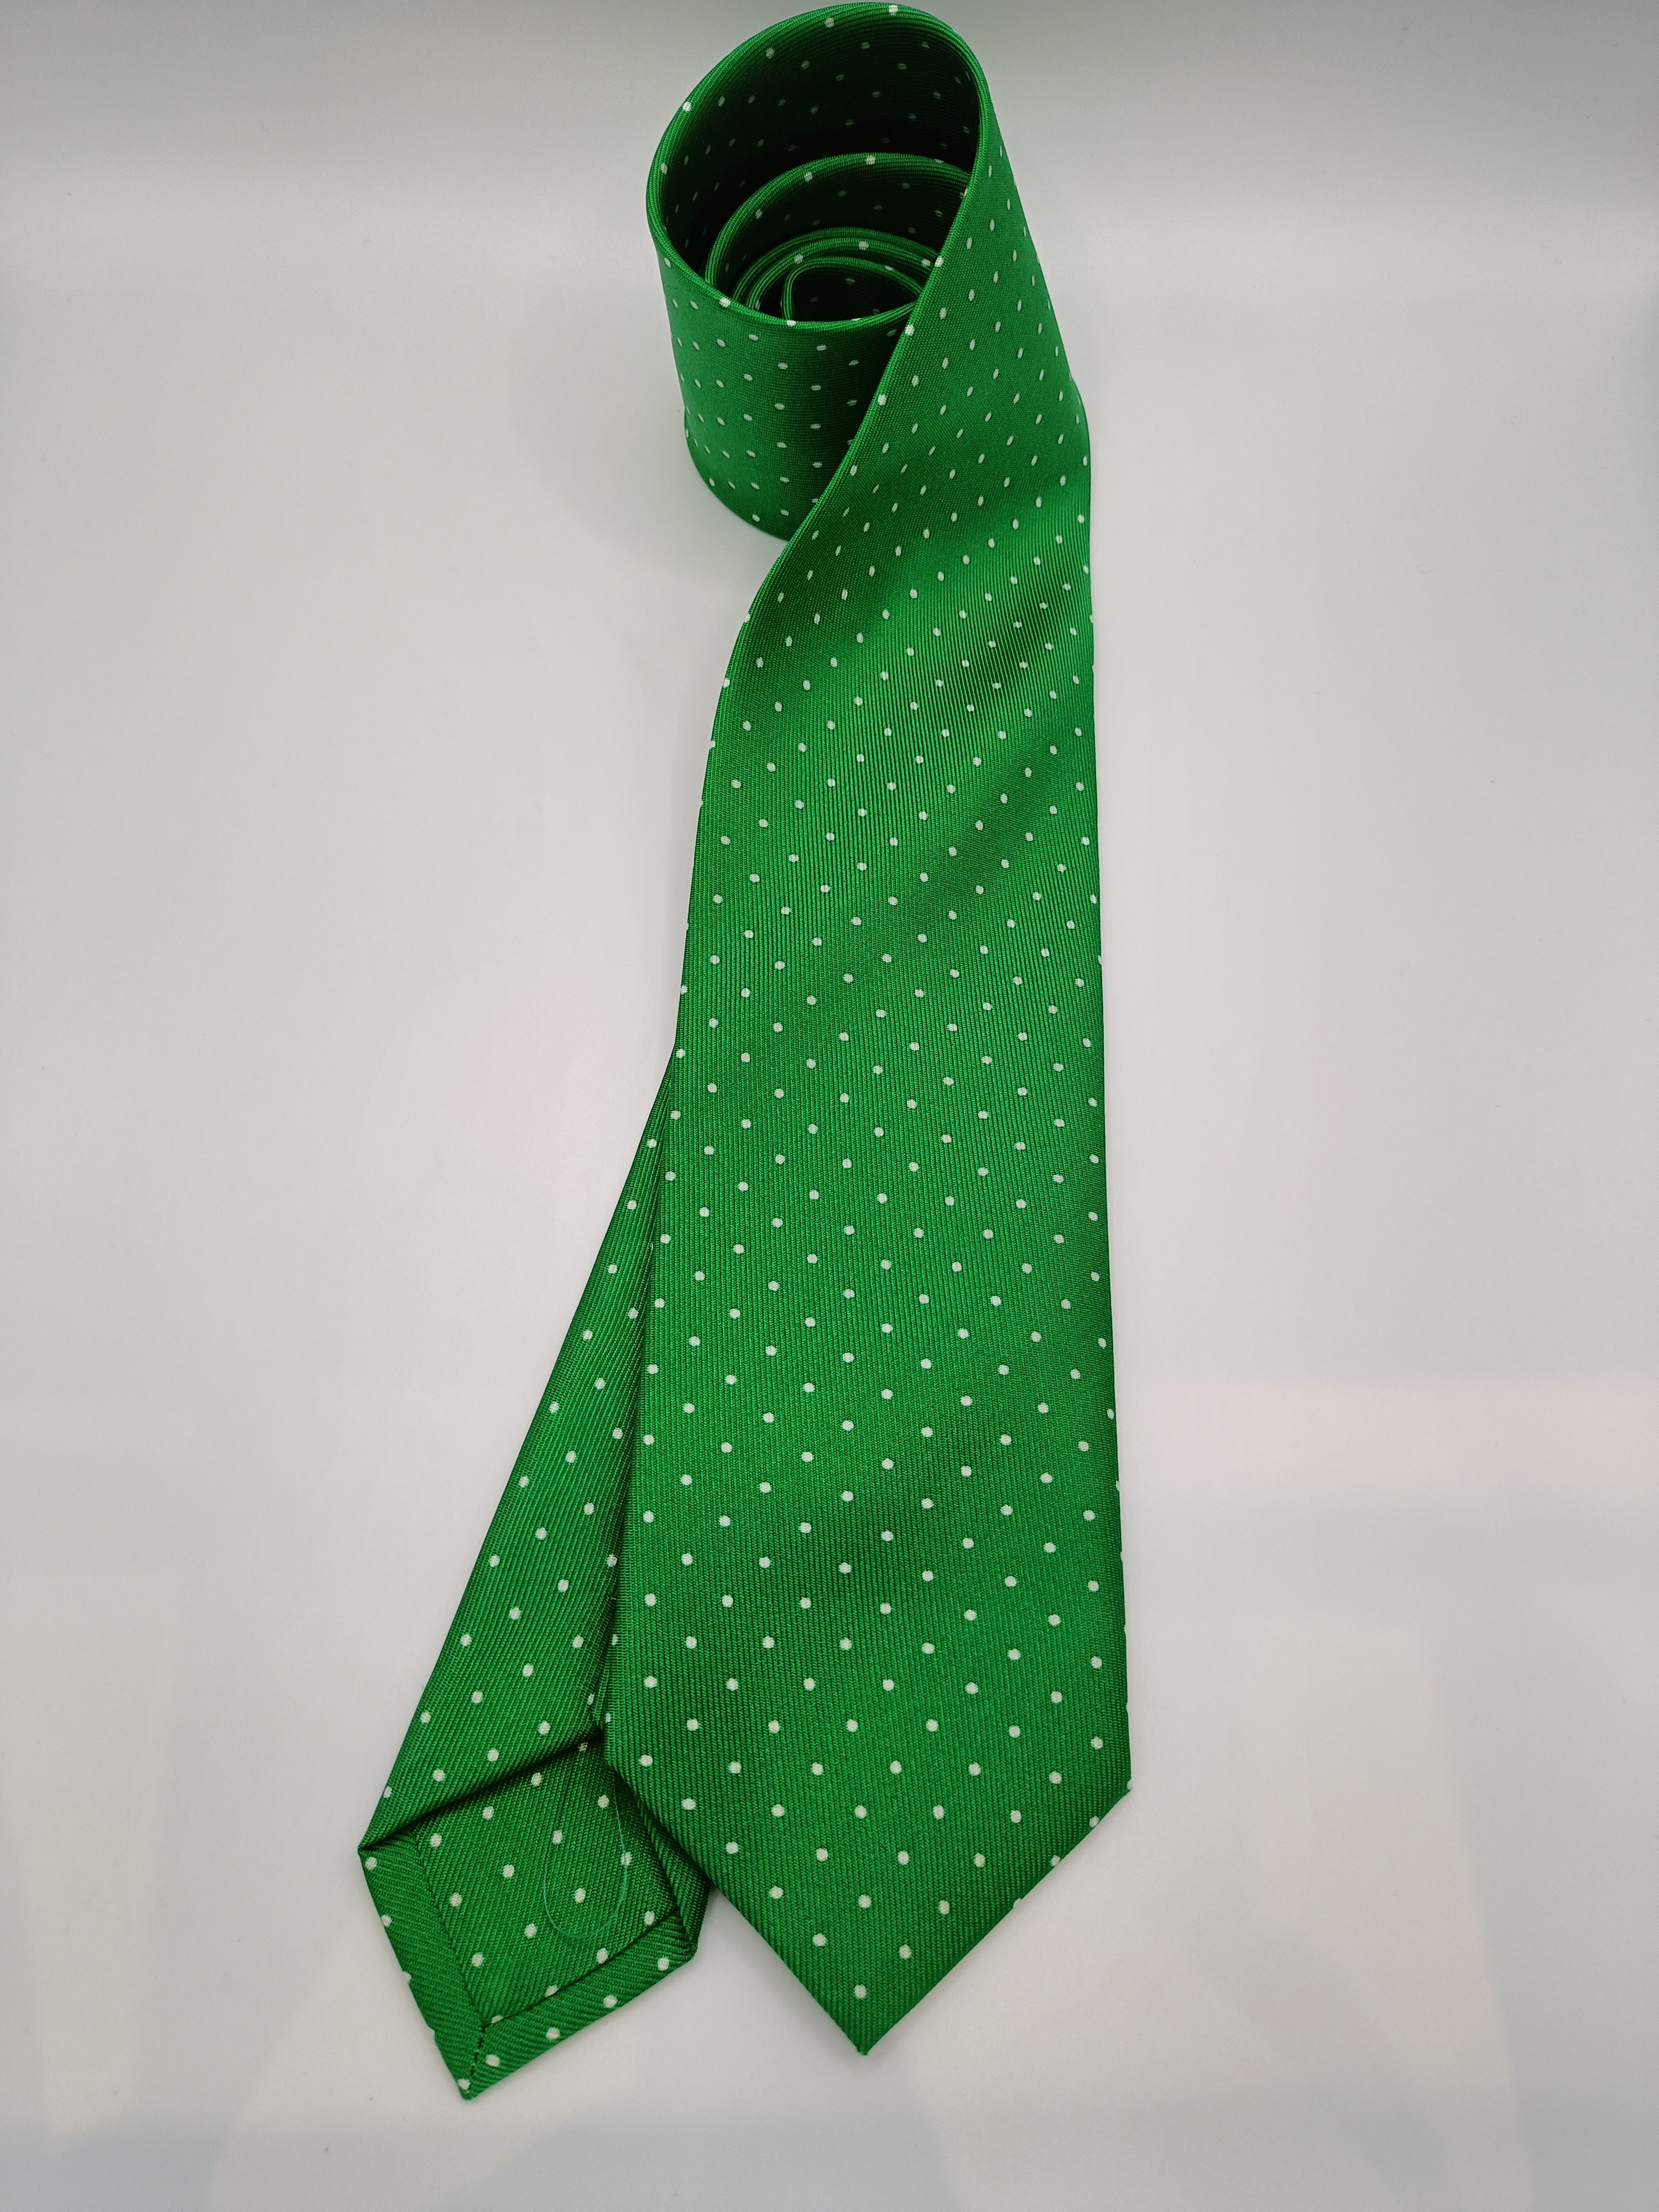 Grass Green and White Polka Dots Tie